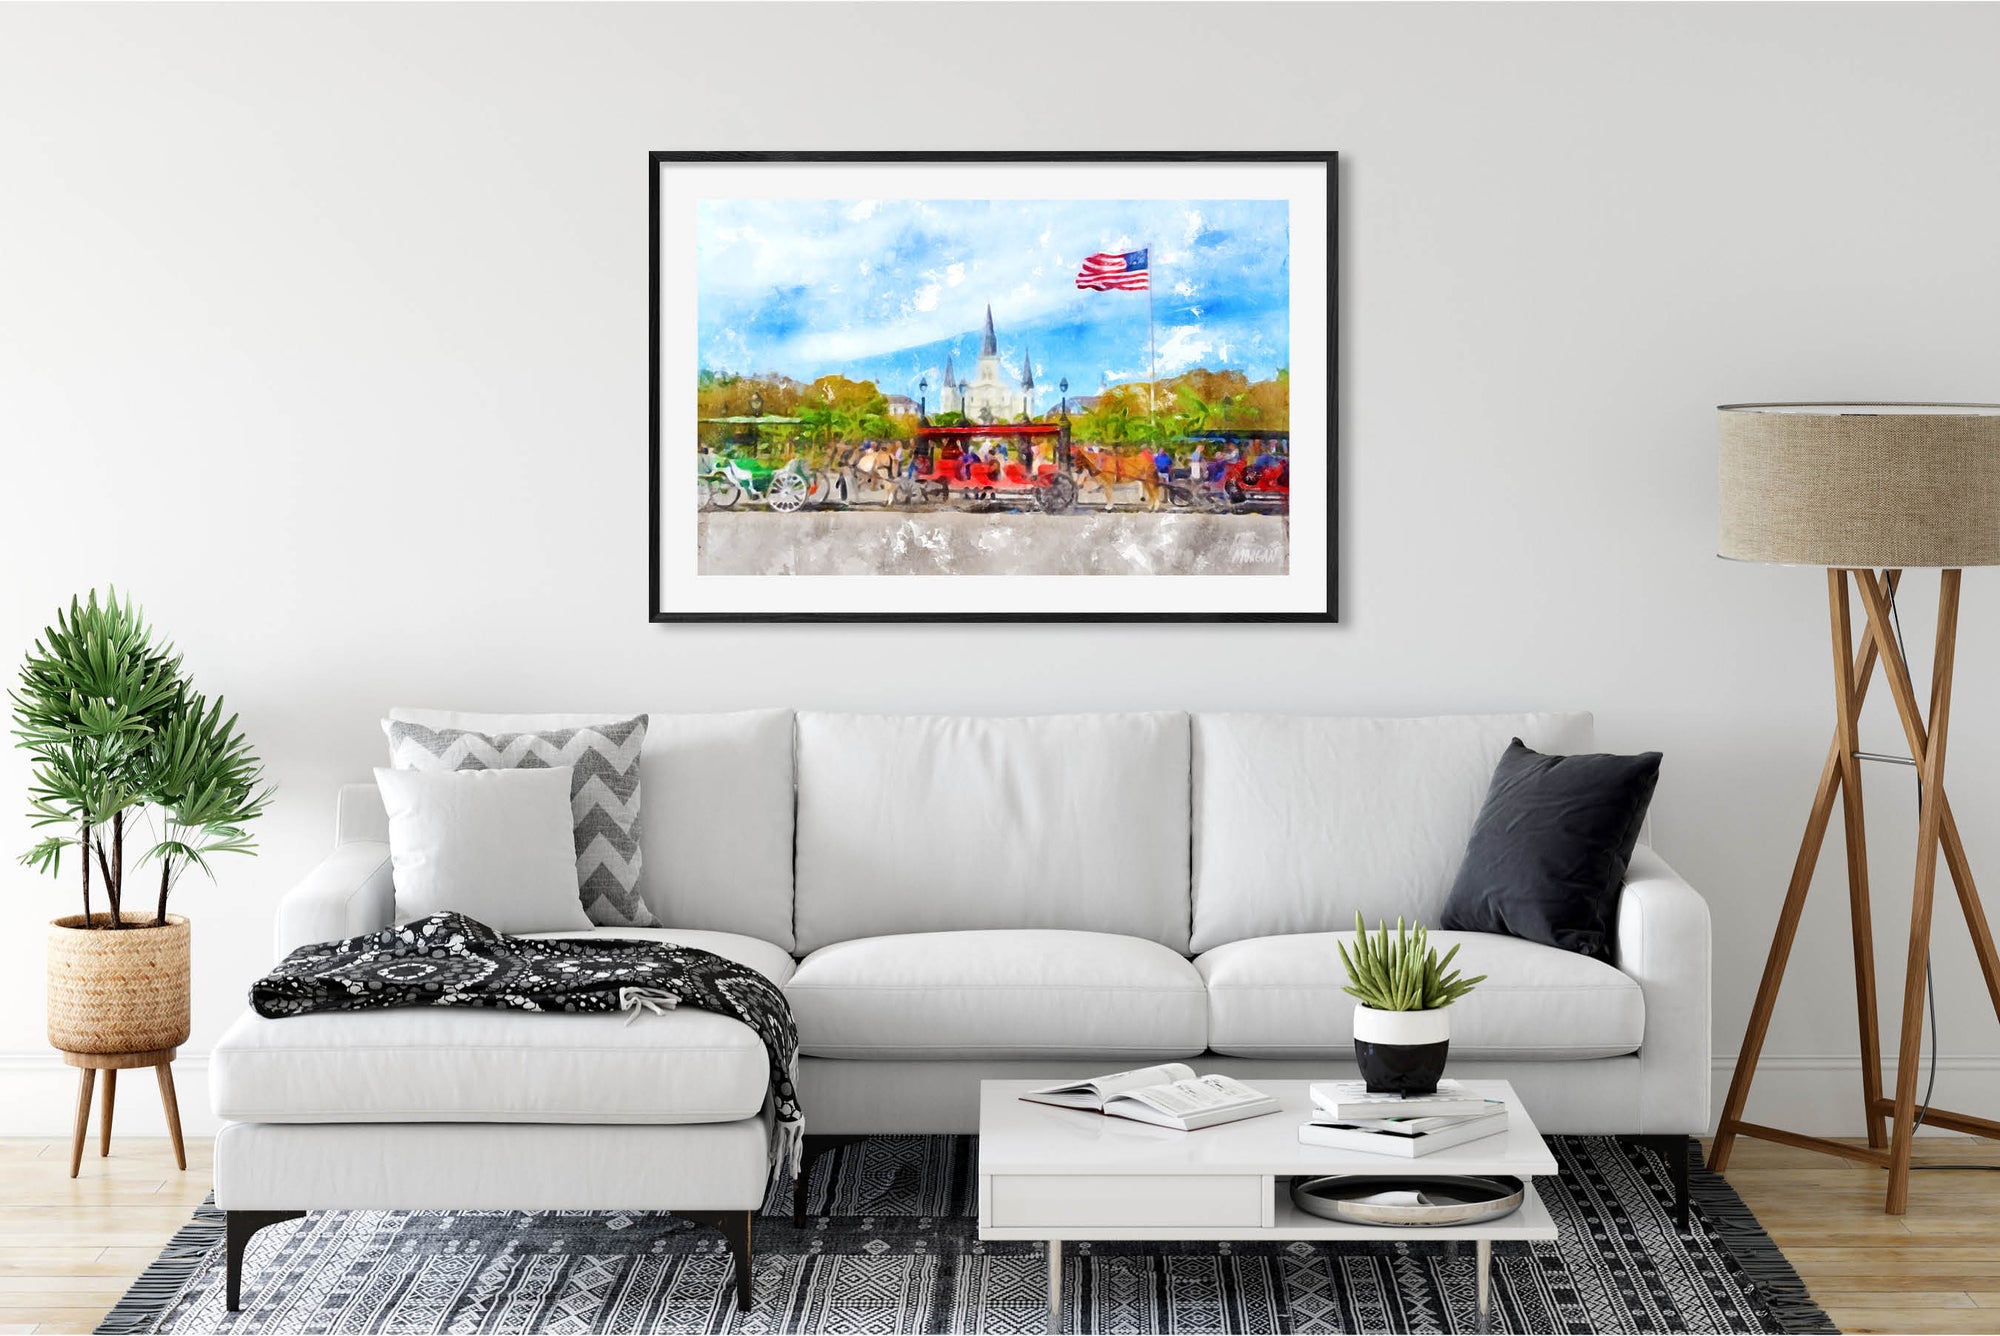 Jackson Square - New Orleans Art Print In Room